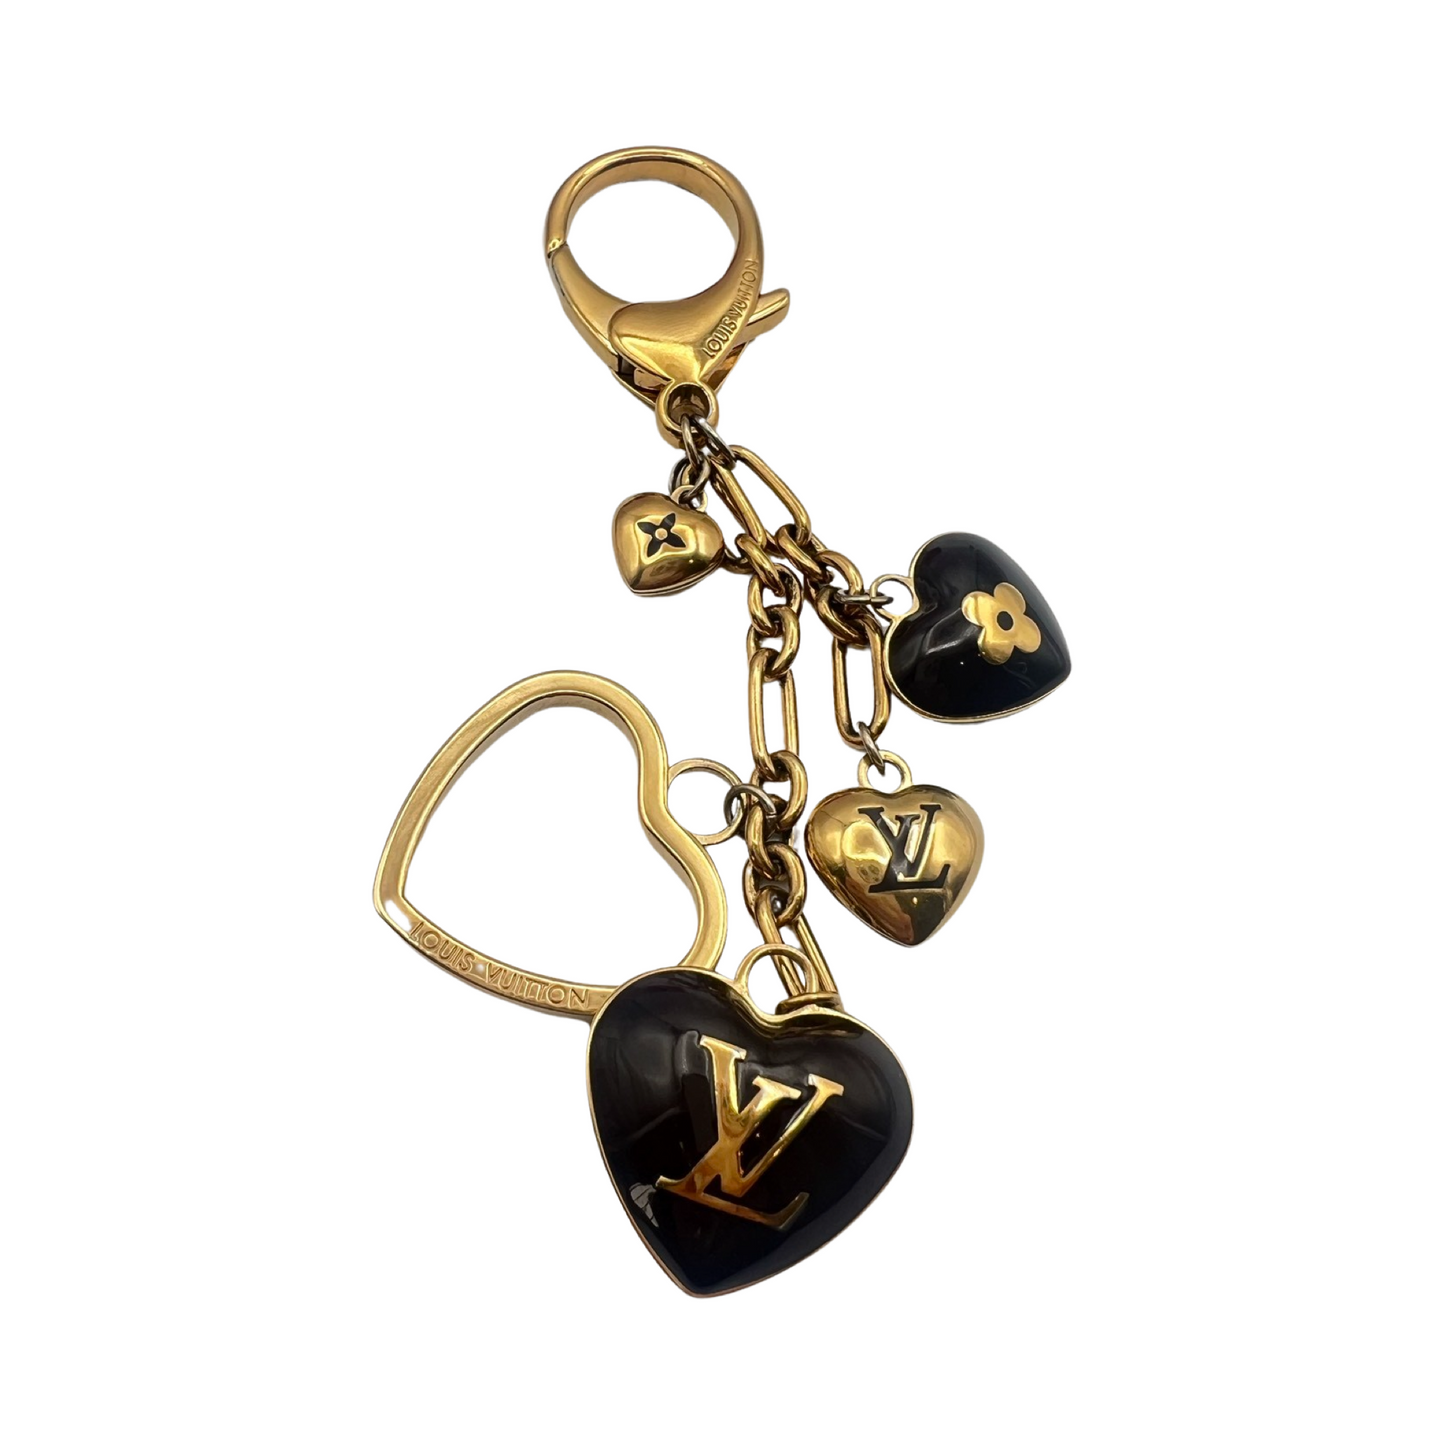 Repurposed LV Open Heart Charm Necklace